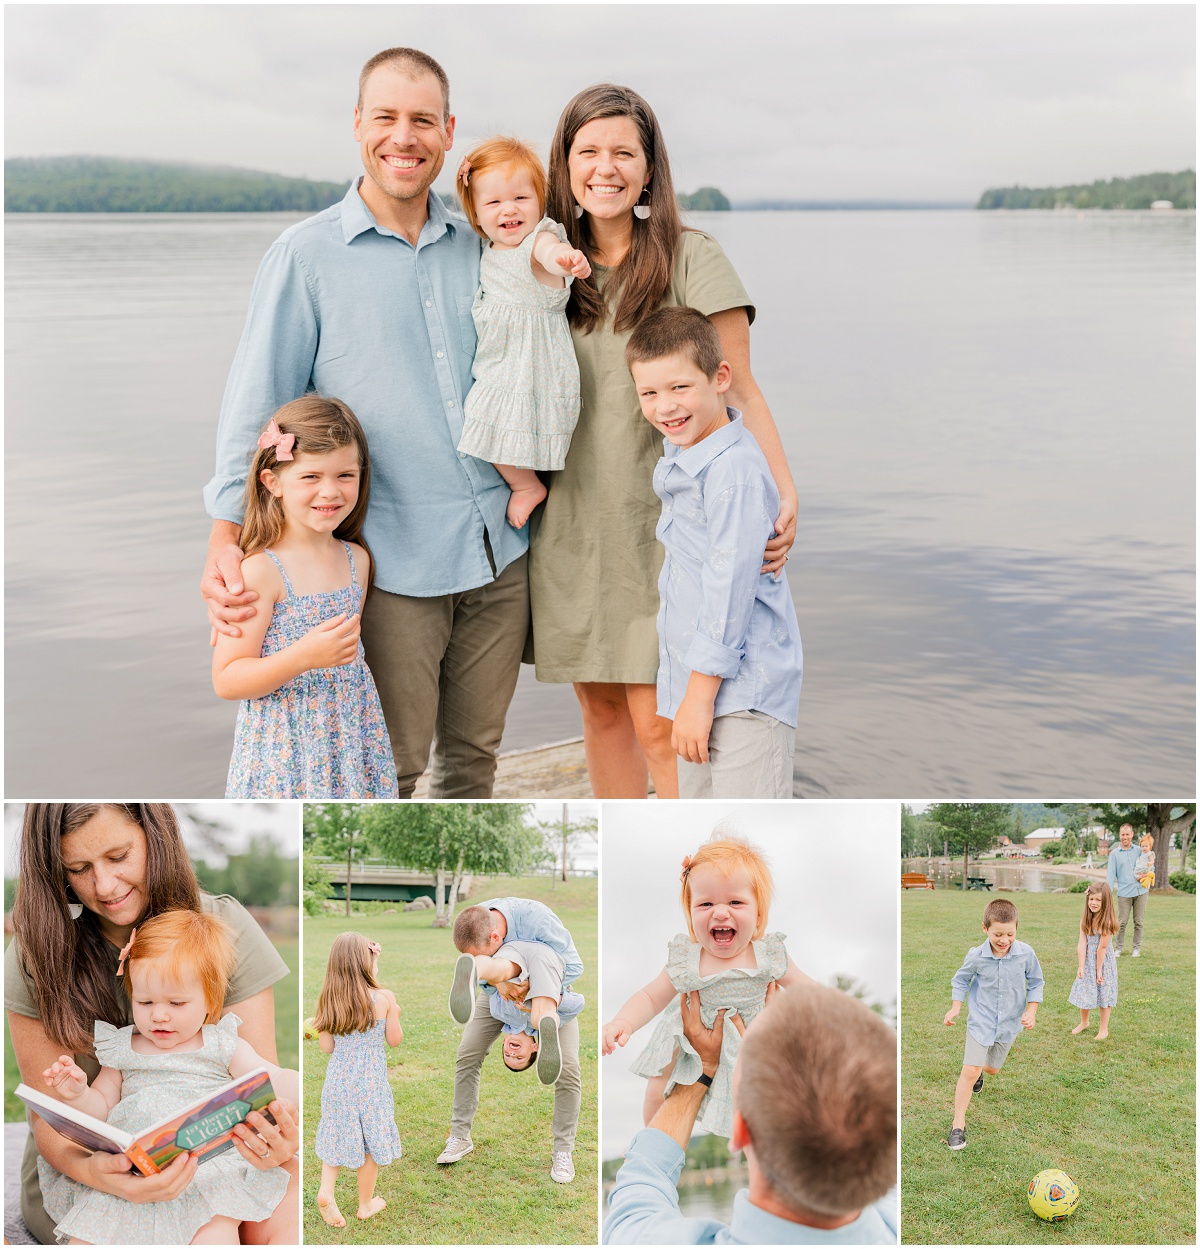 Image header with 5 images of a family of 5